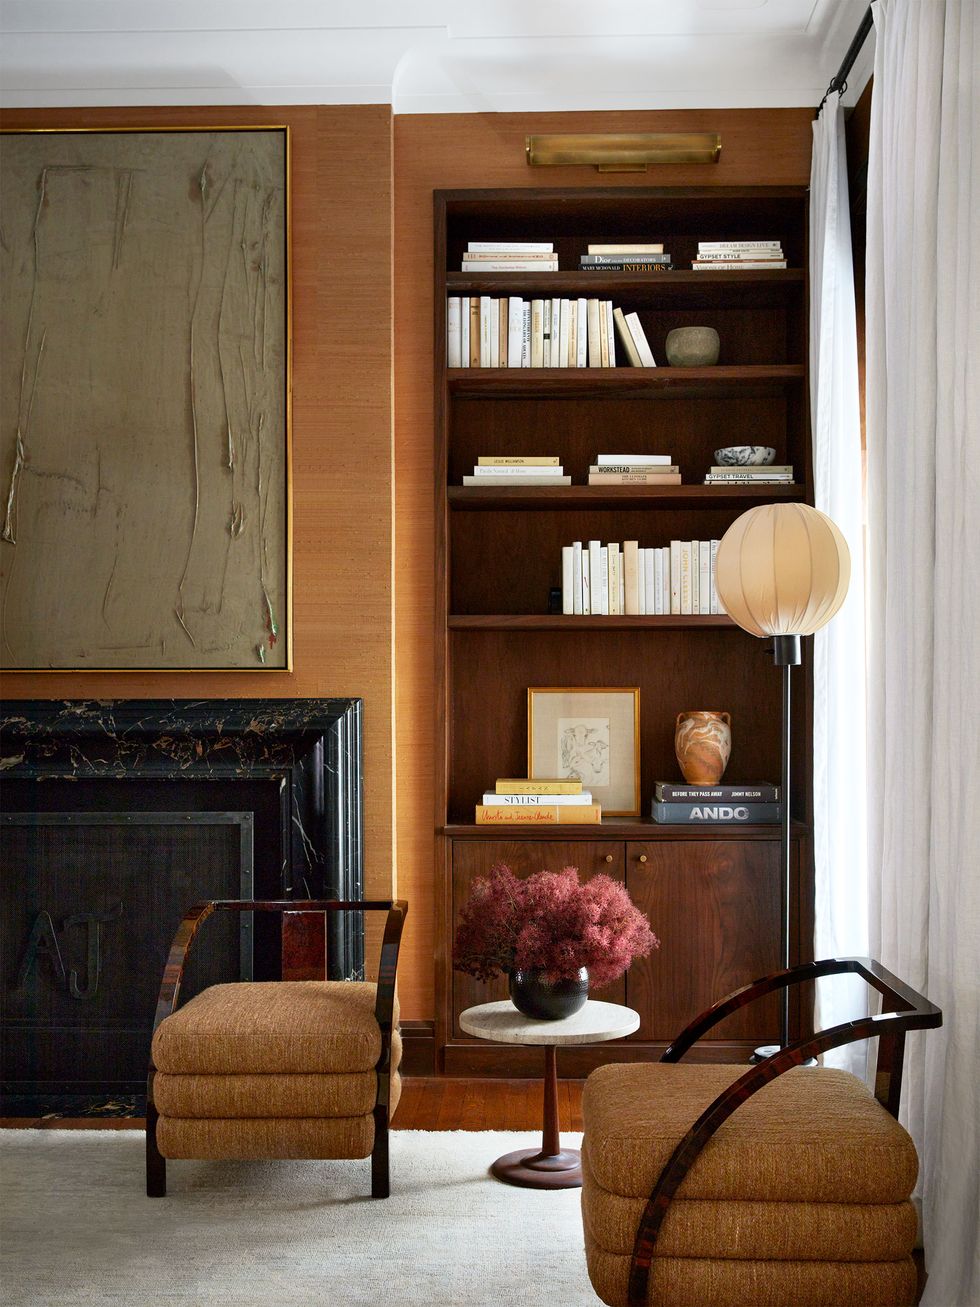 The corner of the bedroom has two chairs with three seat cushions each, a small round marble top pedestal table, a floor lamp with a globe shade, a built-in bookshelf, and a black marble fireplace.